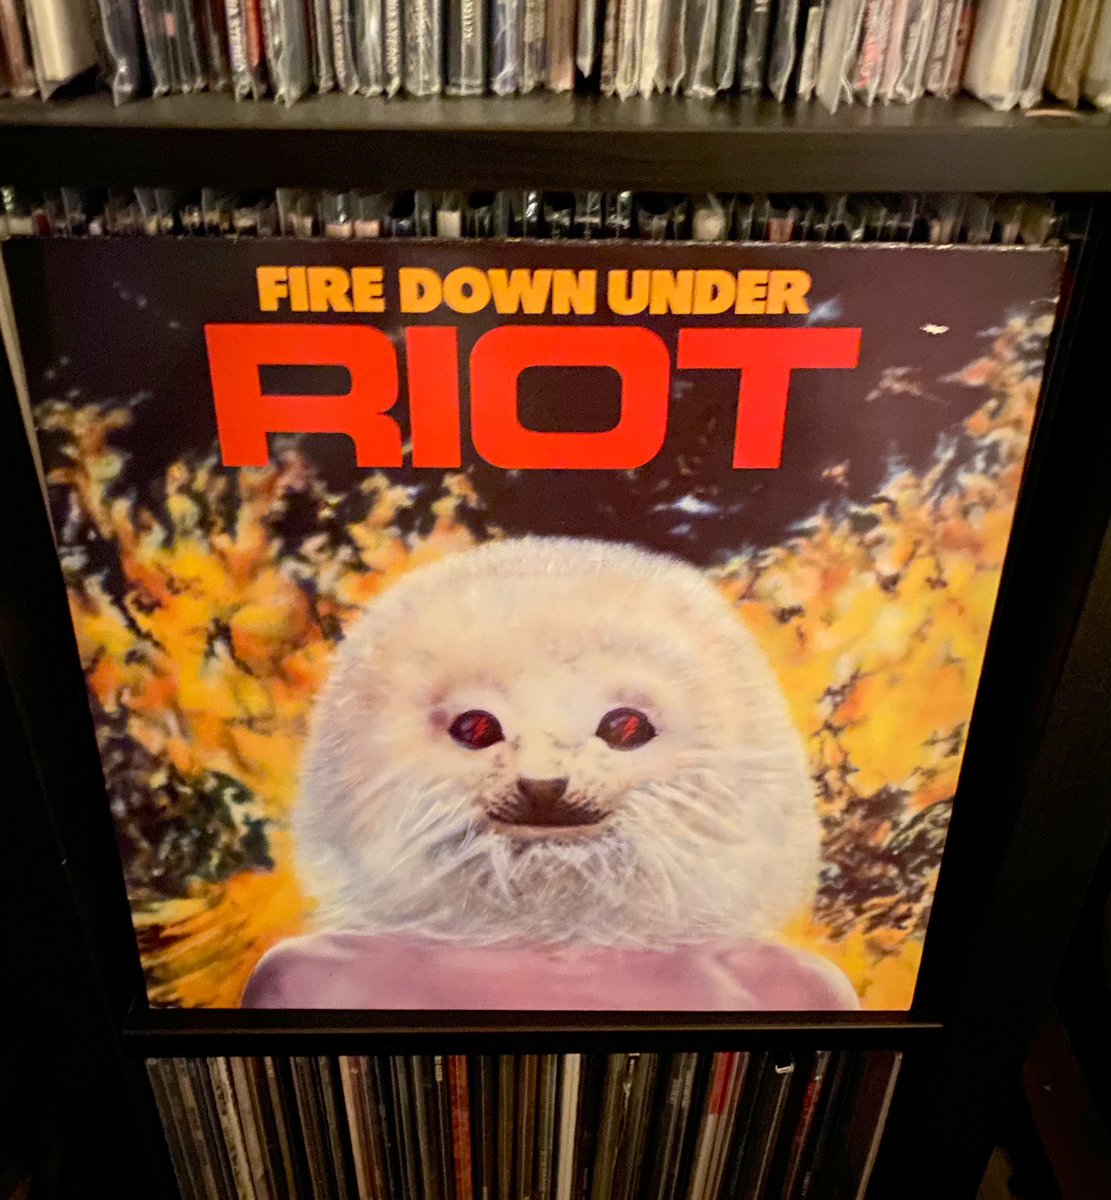 RIOT ~ 'Fire Down Under'
youtu.be/NNTfsQKKpDY
Released 40 years ago today!
#RIOT #FireDownUnder 
#VinylCollection #Metal
A magical album from one of the most underrated bands of all-time! (2/09/1981)
#AltarOfTheKing #Outlaw #DontHoldBack #NoLies #FeelTheSame #RunForYourLife